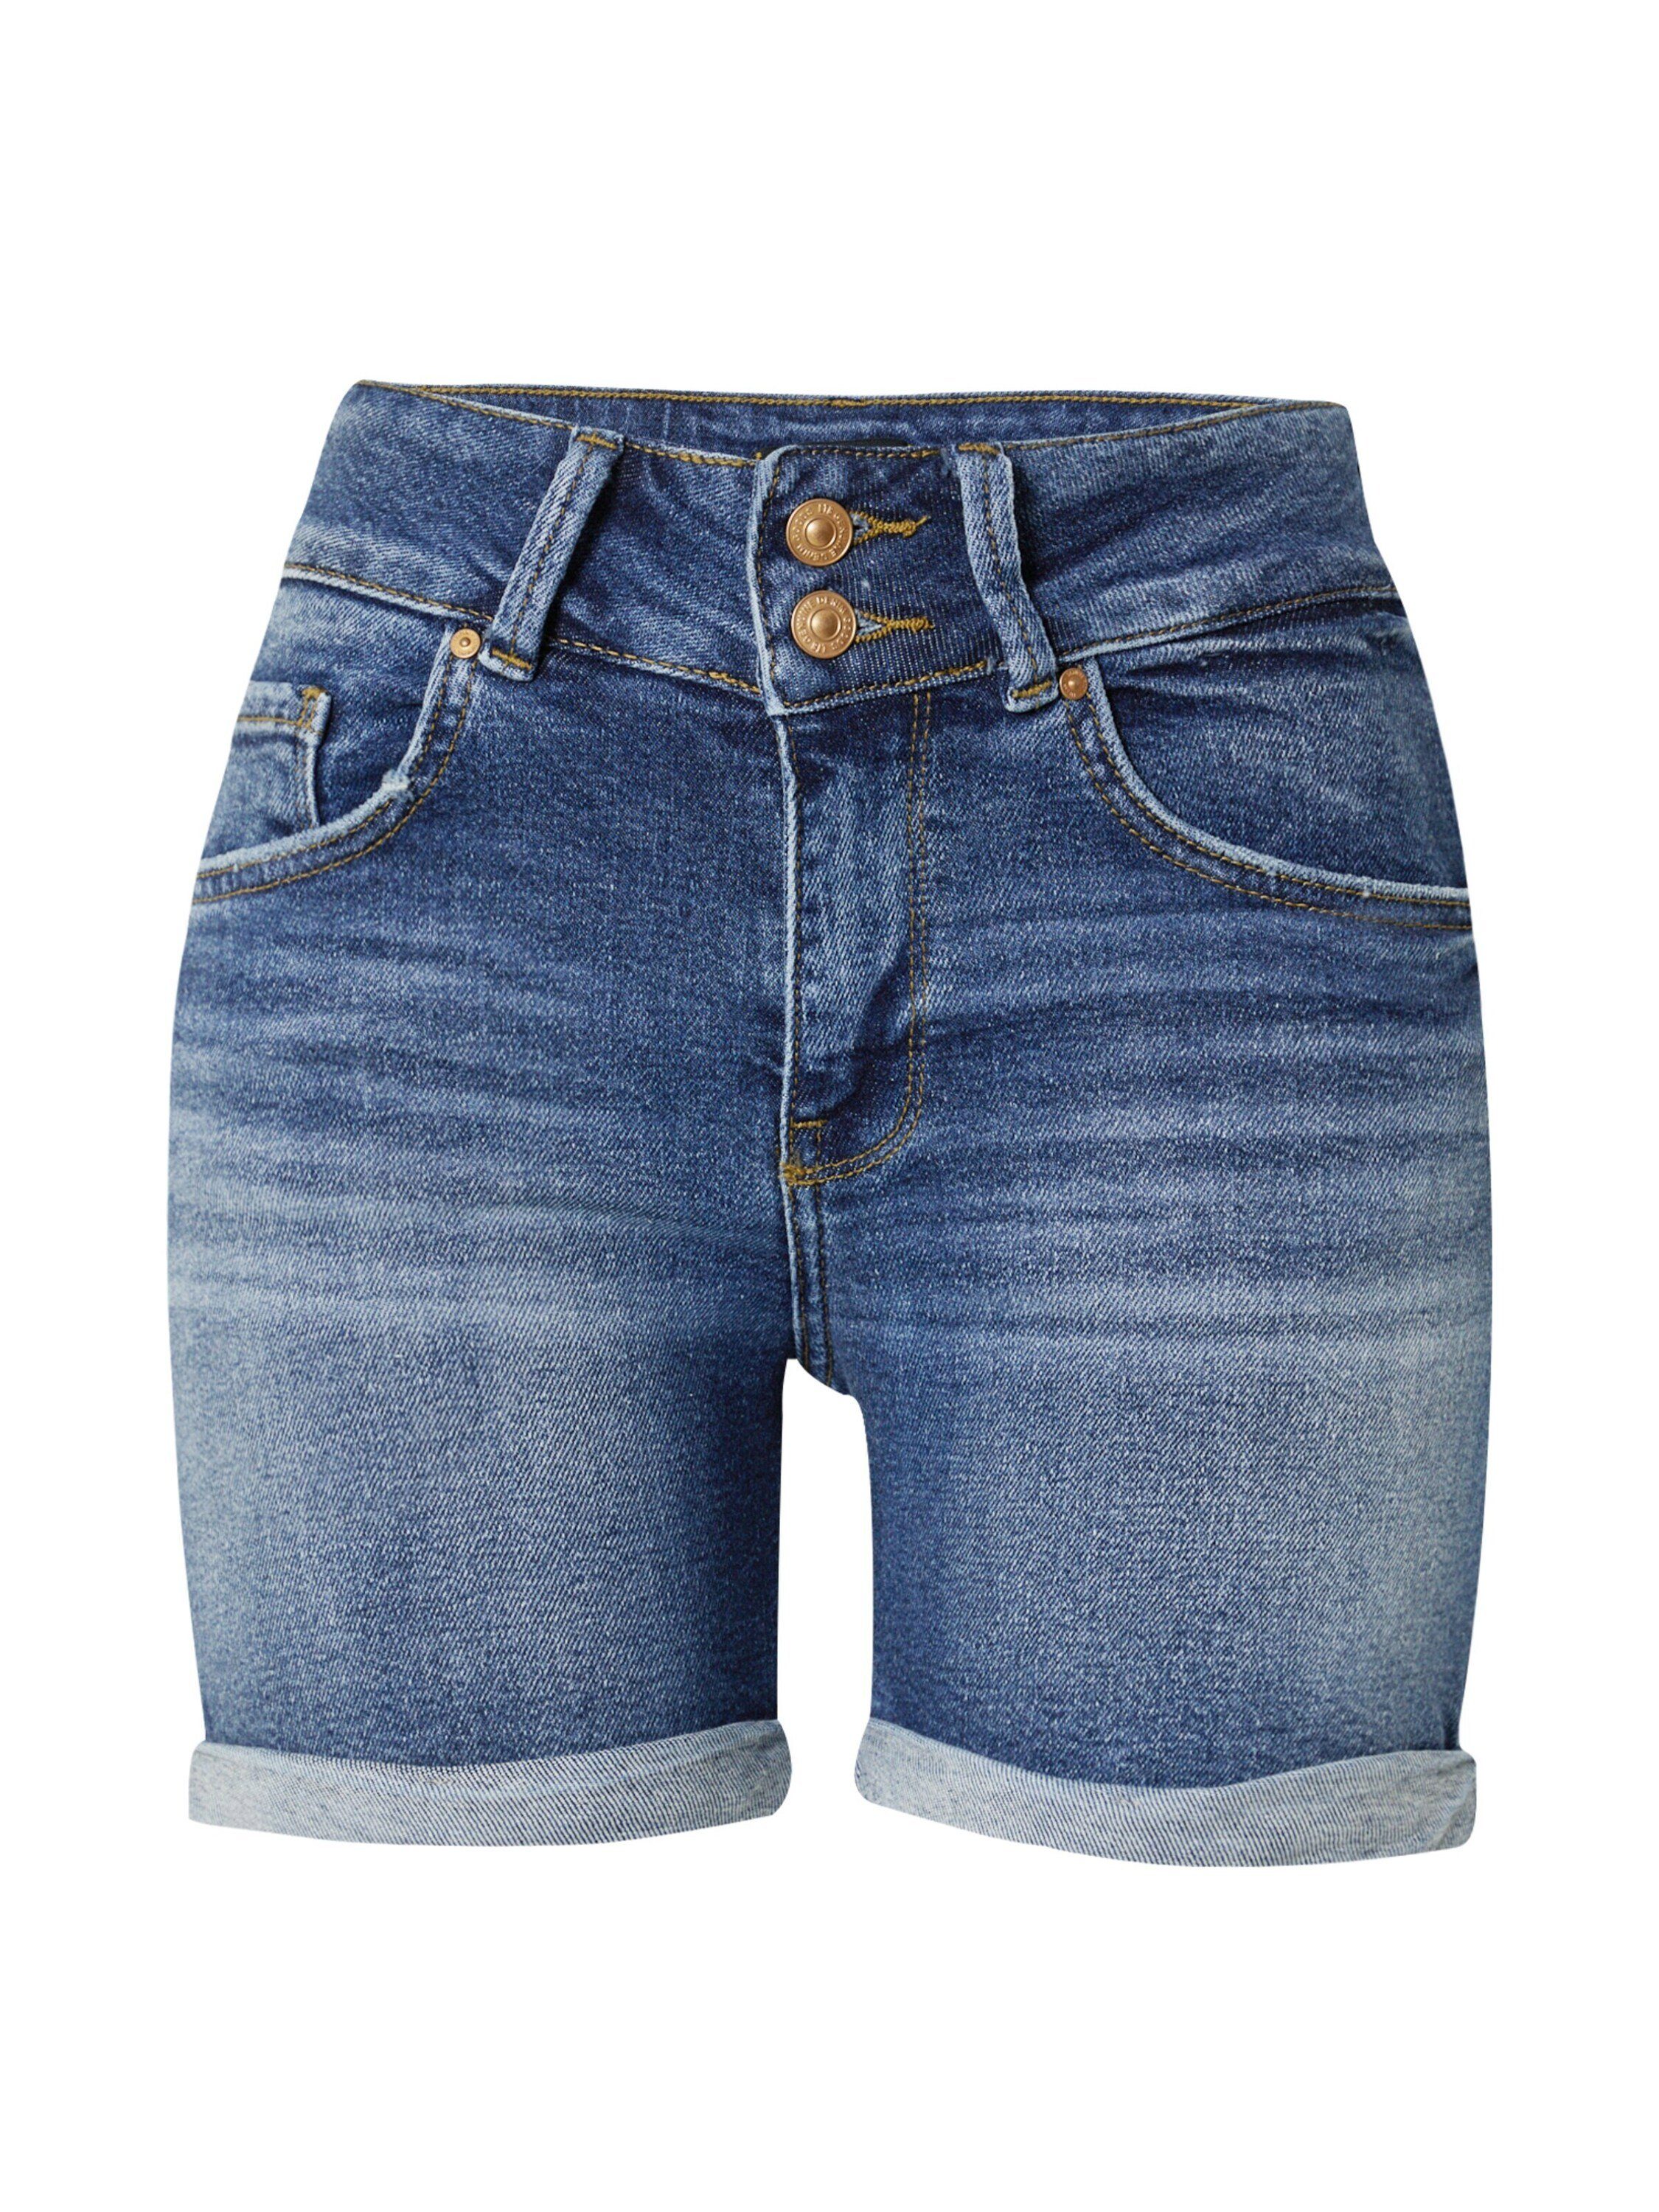 Weiteres (1-tlg) Details, Jeansshorts BECKY Plain/ohne Detail LTB